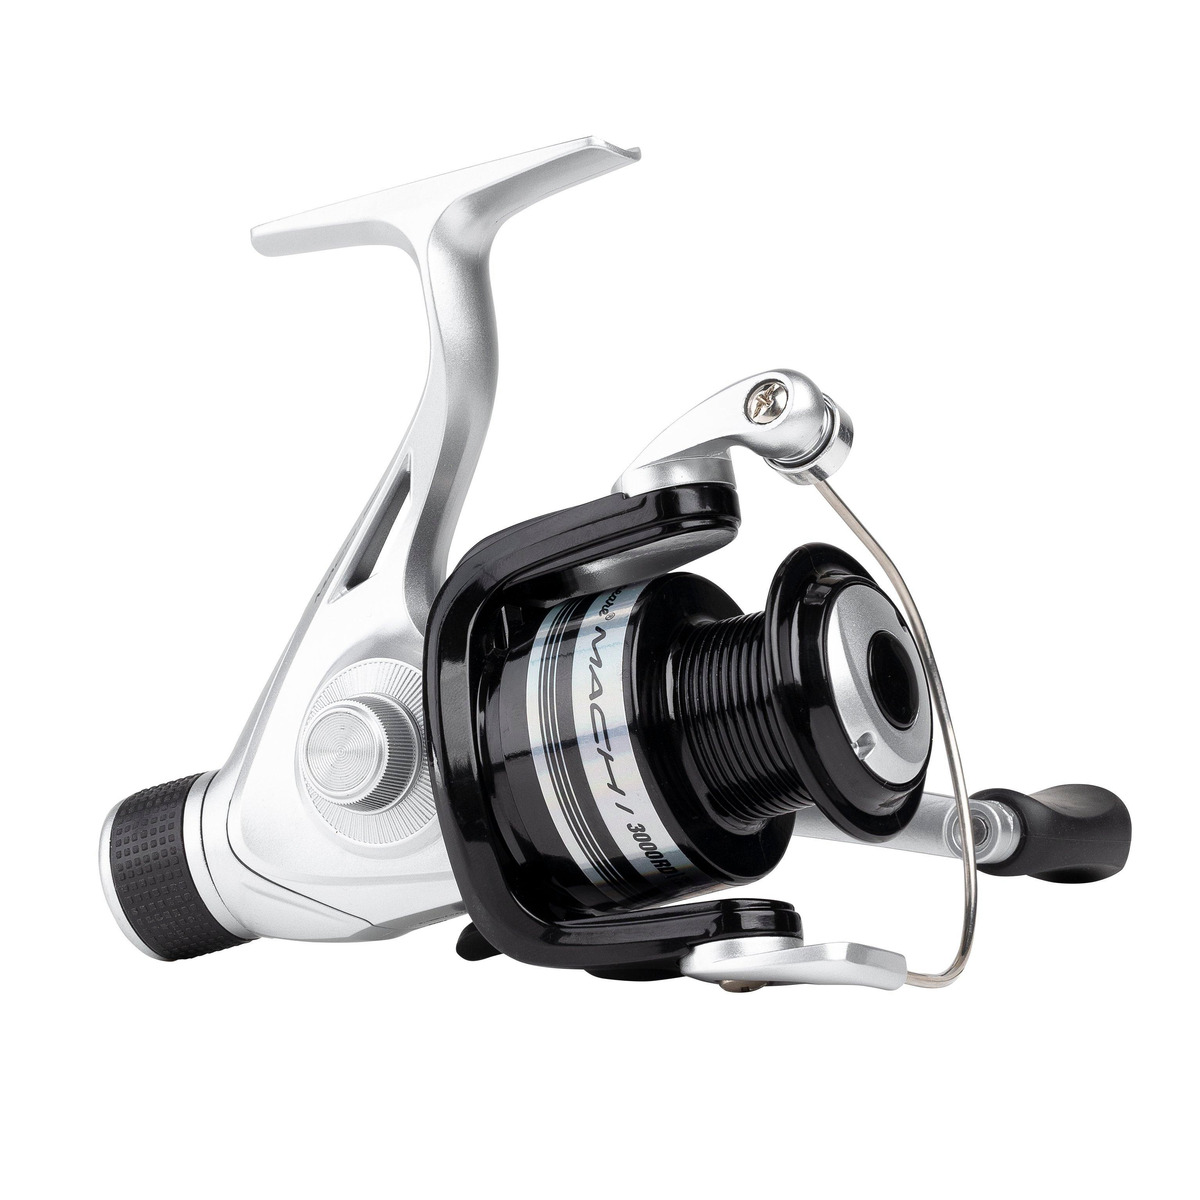 Shakespeare Mach 1 Spinning Reel Rd - 50 RD